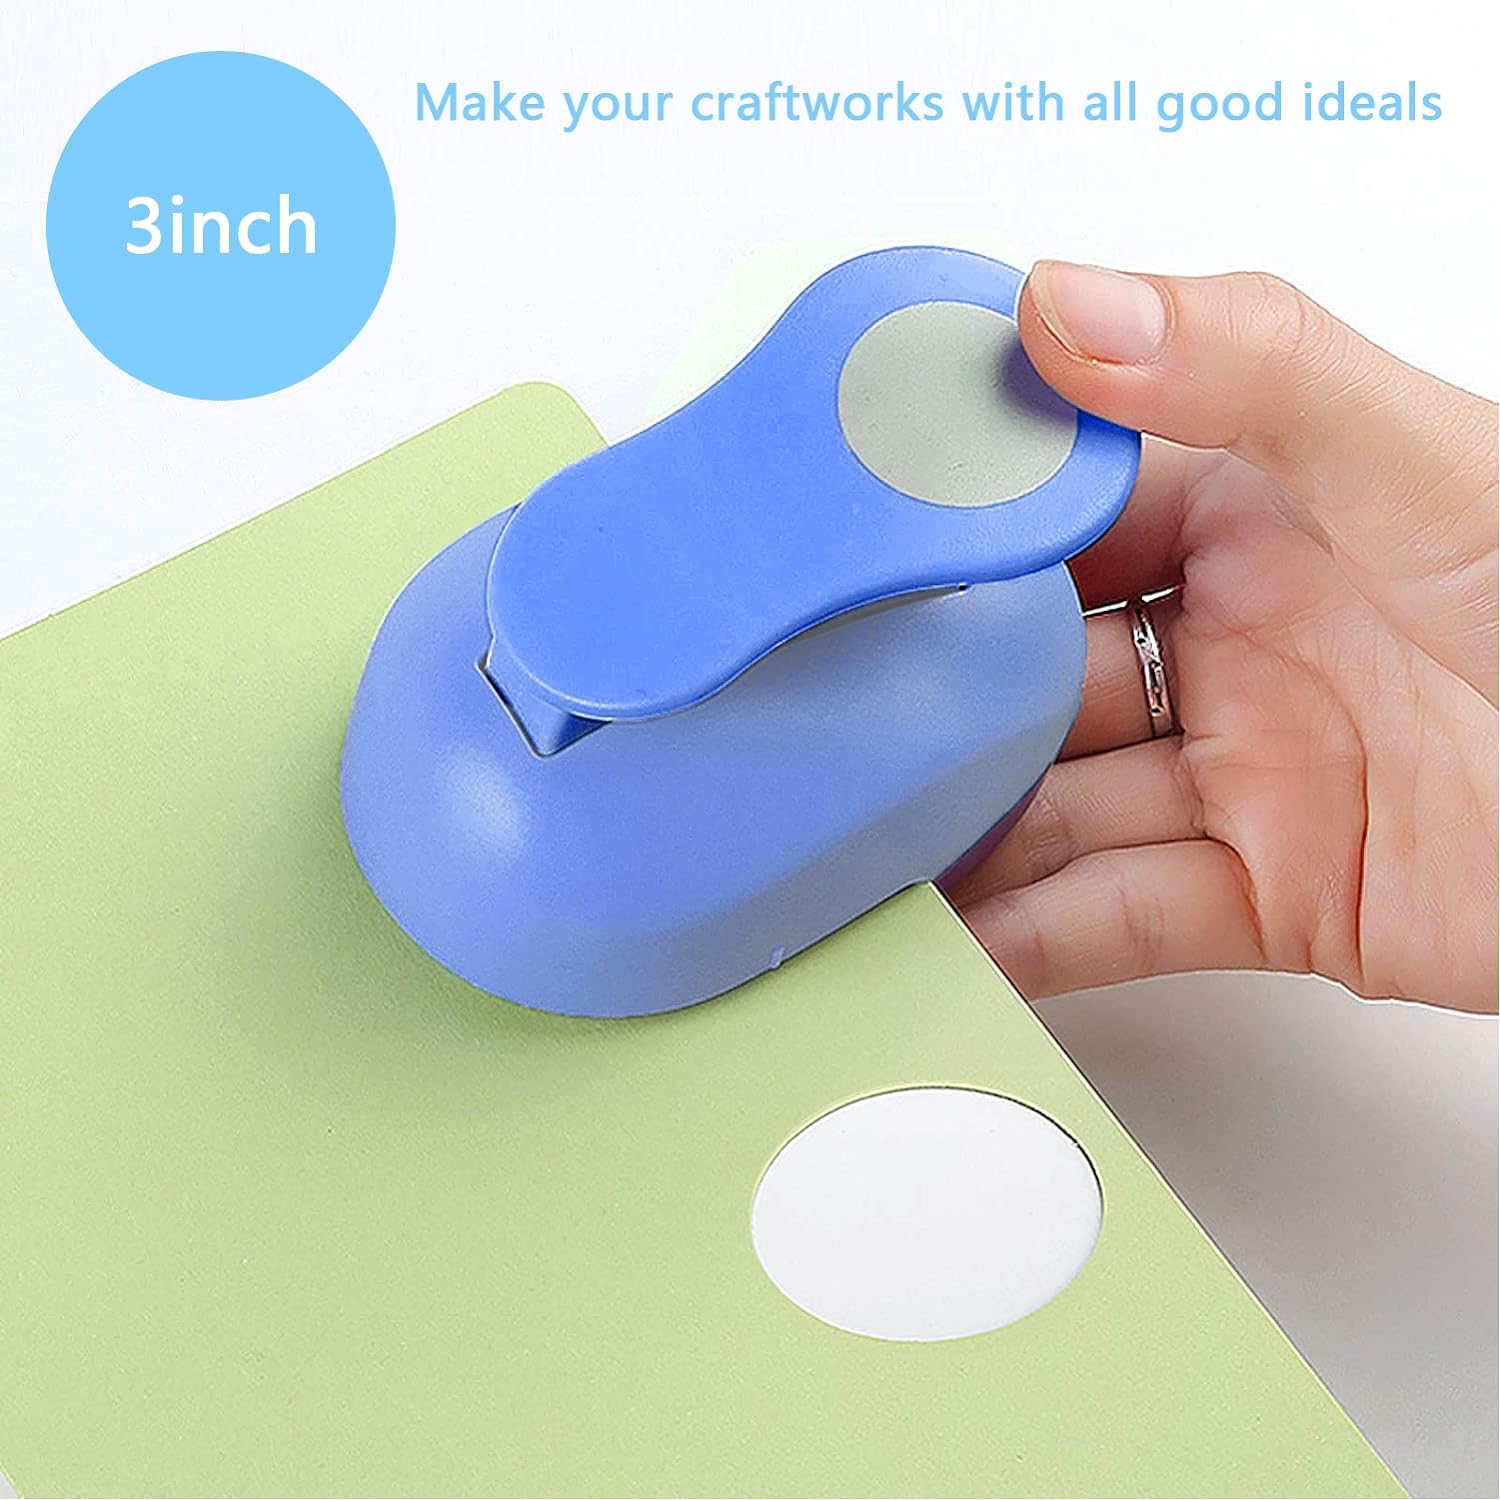 Large 3 Inch Craft Circle Hole Paper Punch for Greeting Cards,Scrapbook